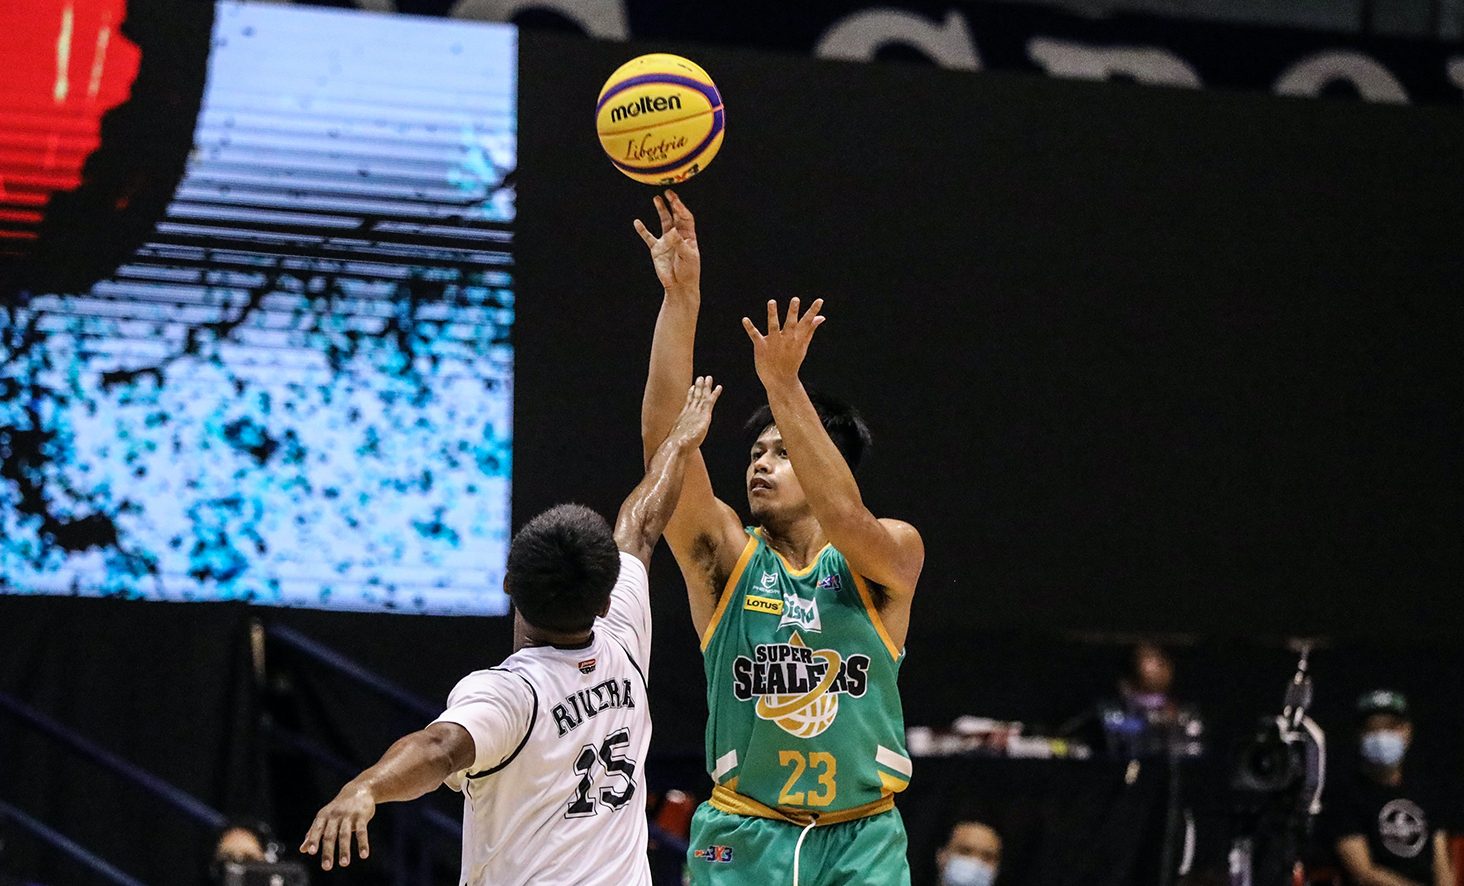 Sista rise continues with PBA 3×3 Leg 3 title win over Pioneer